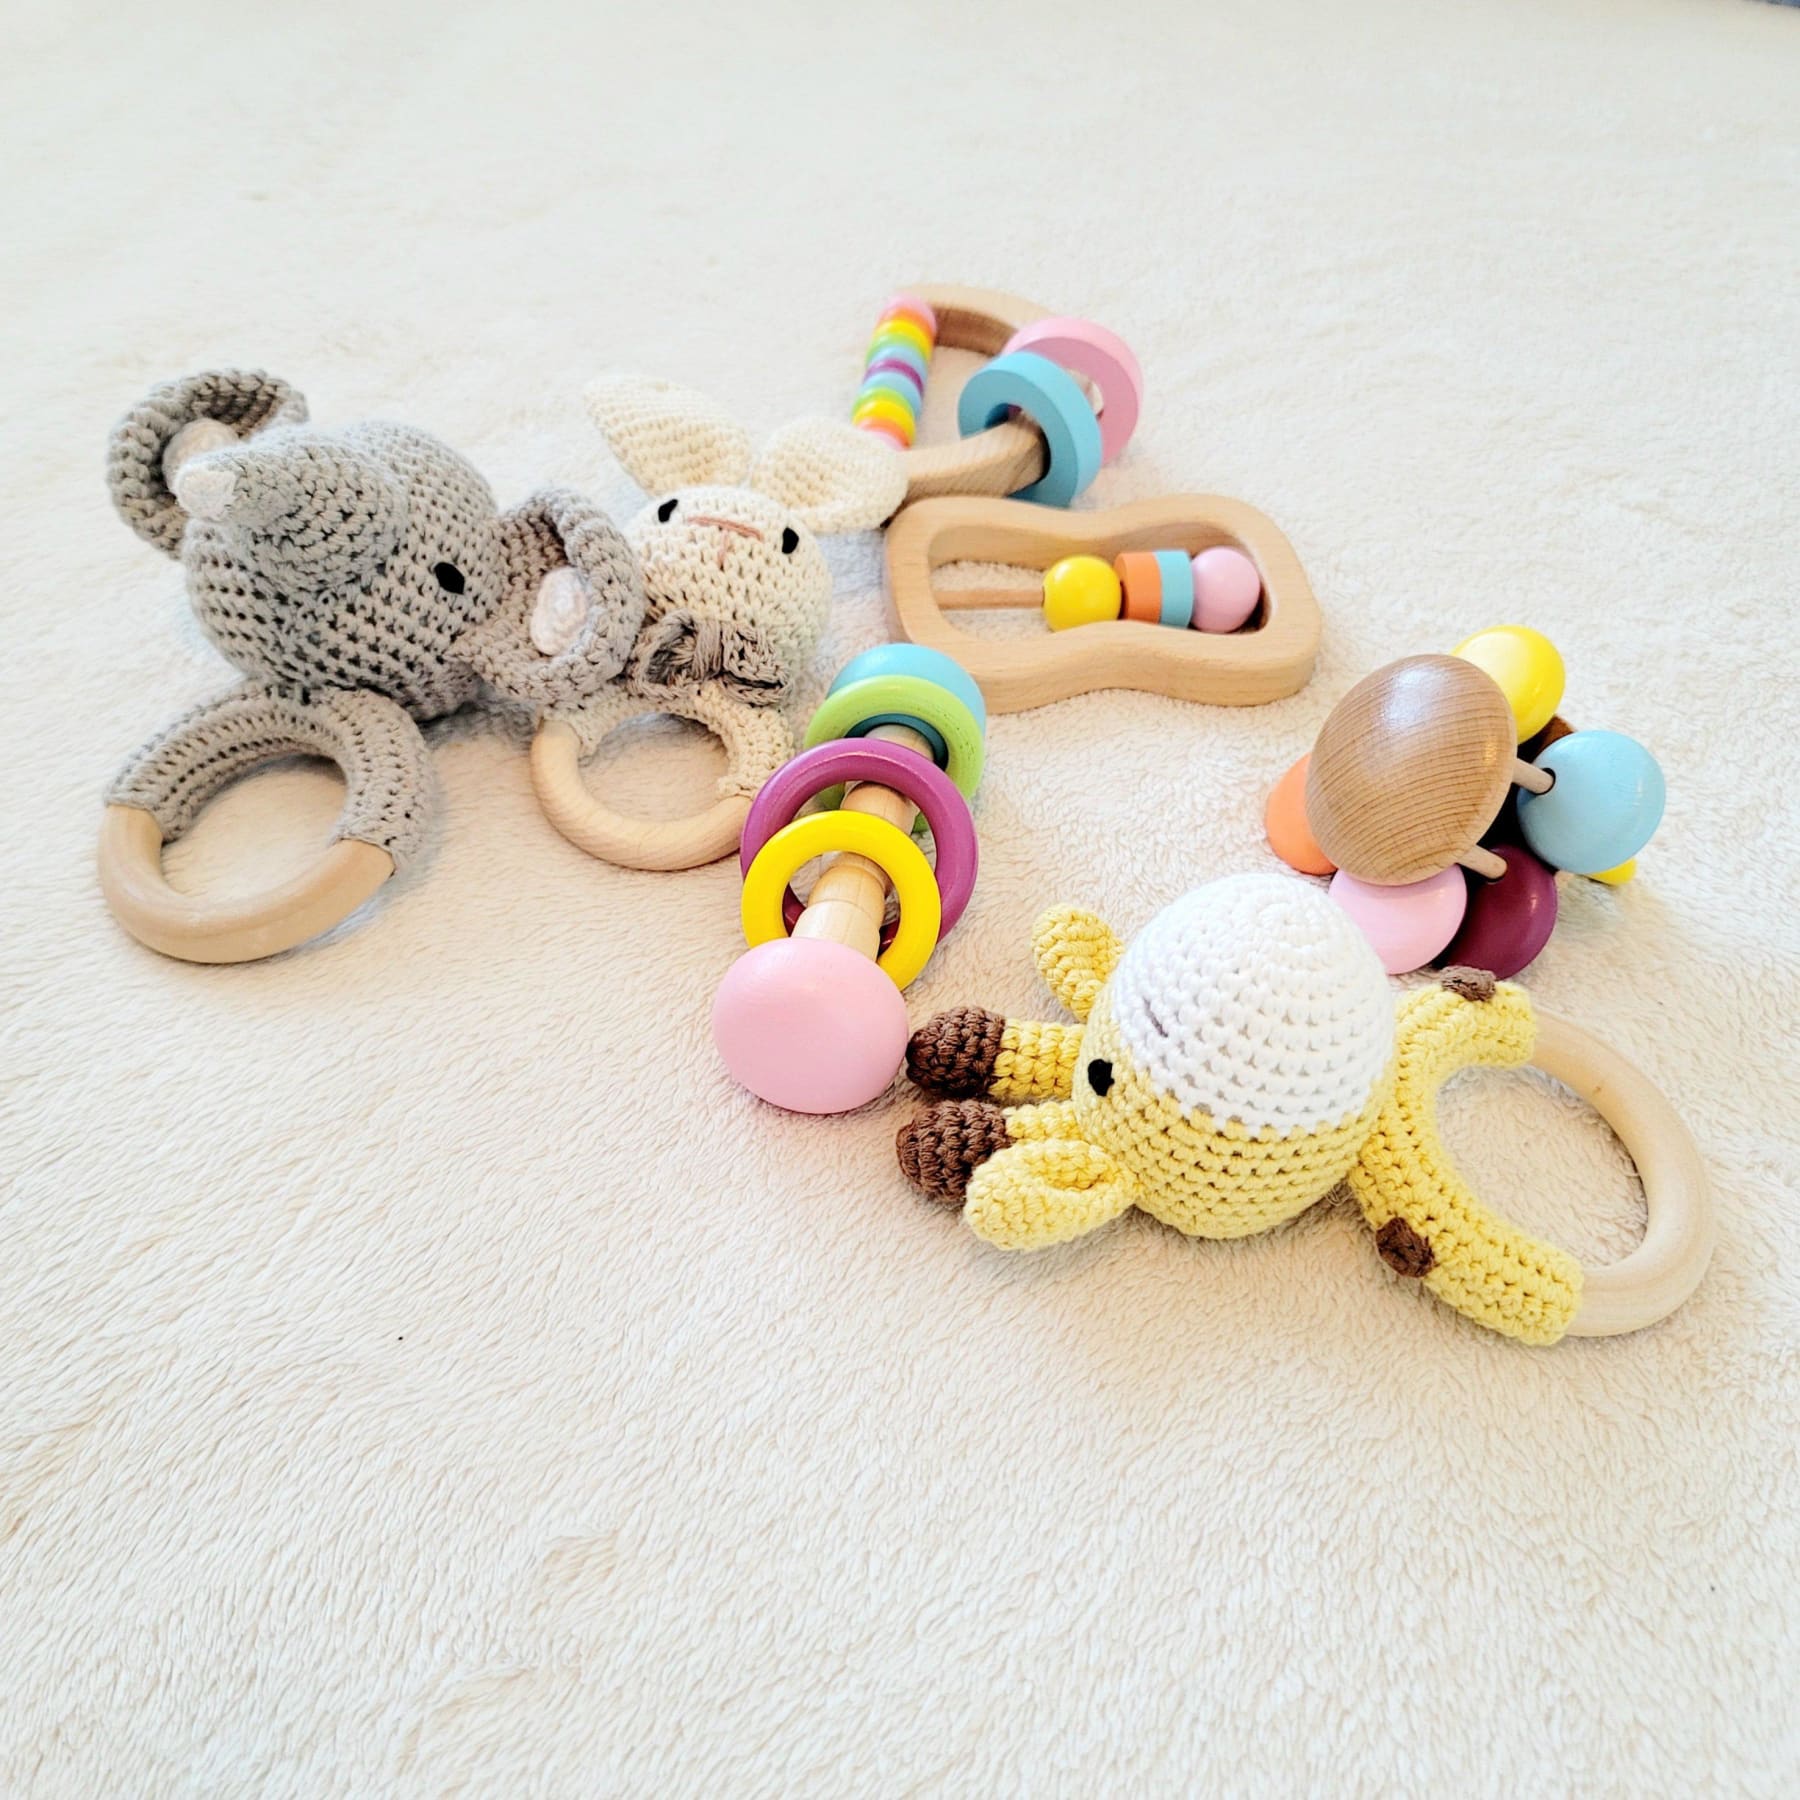 Montessori Wooden Toys Baby Gift Set | Montessori wooden toys and crochet baby rattles | | Hunny Bubba Kids